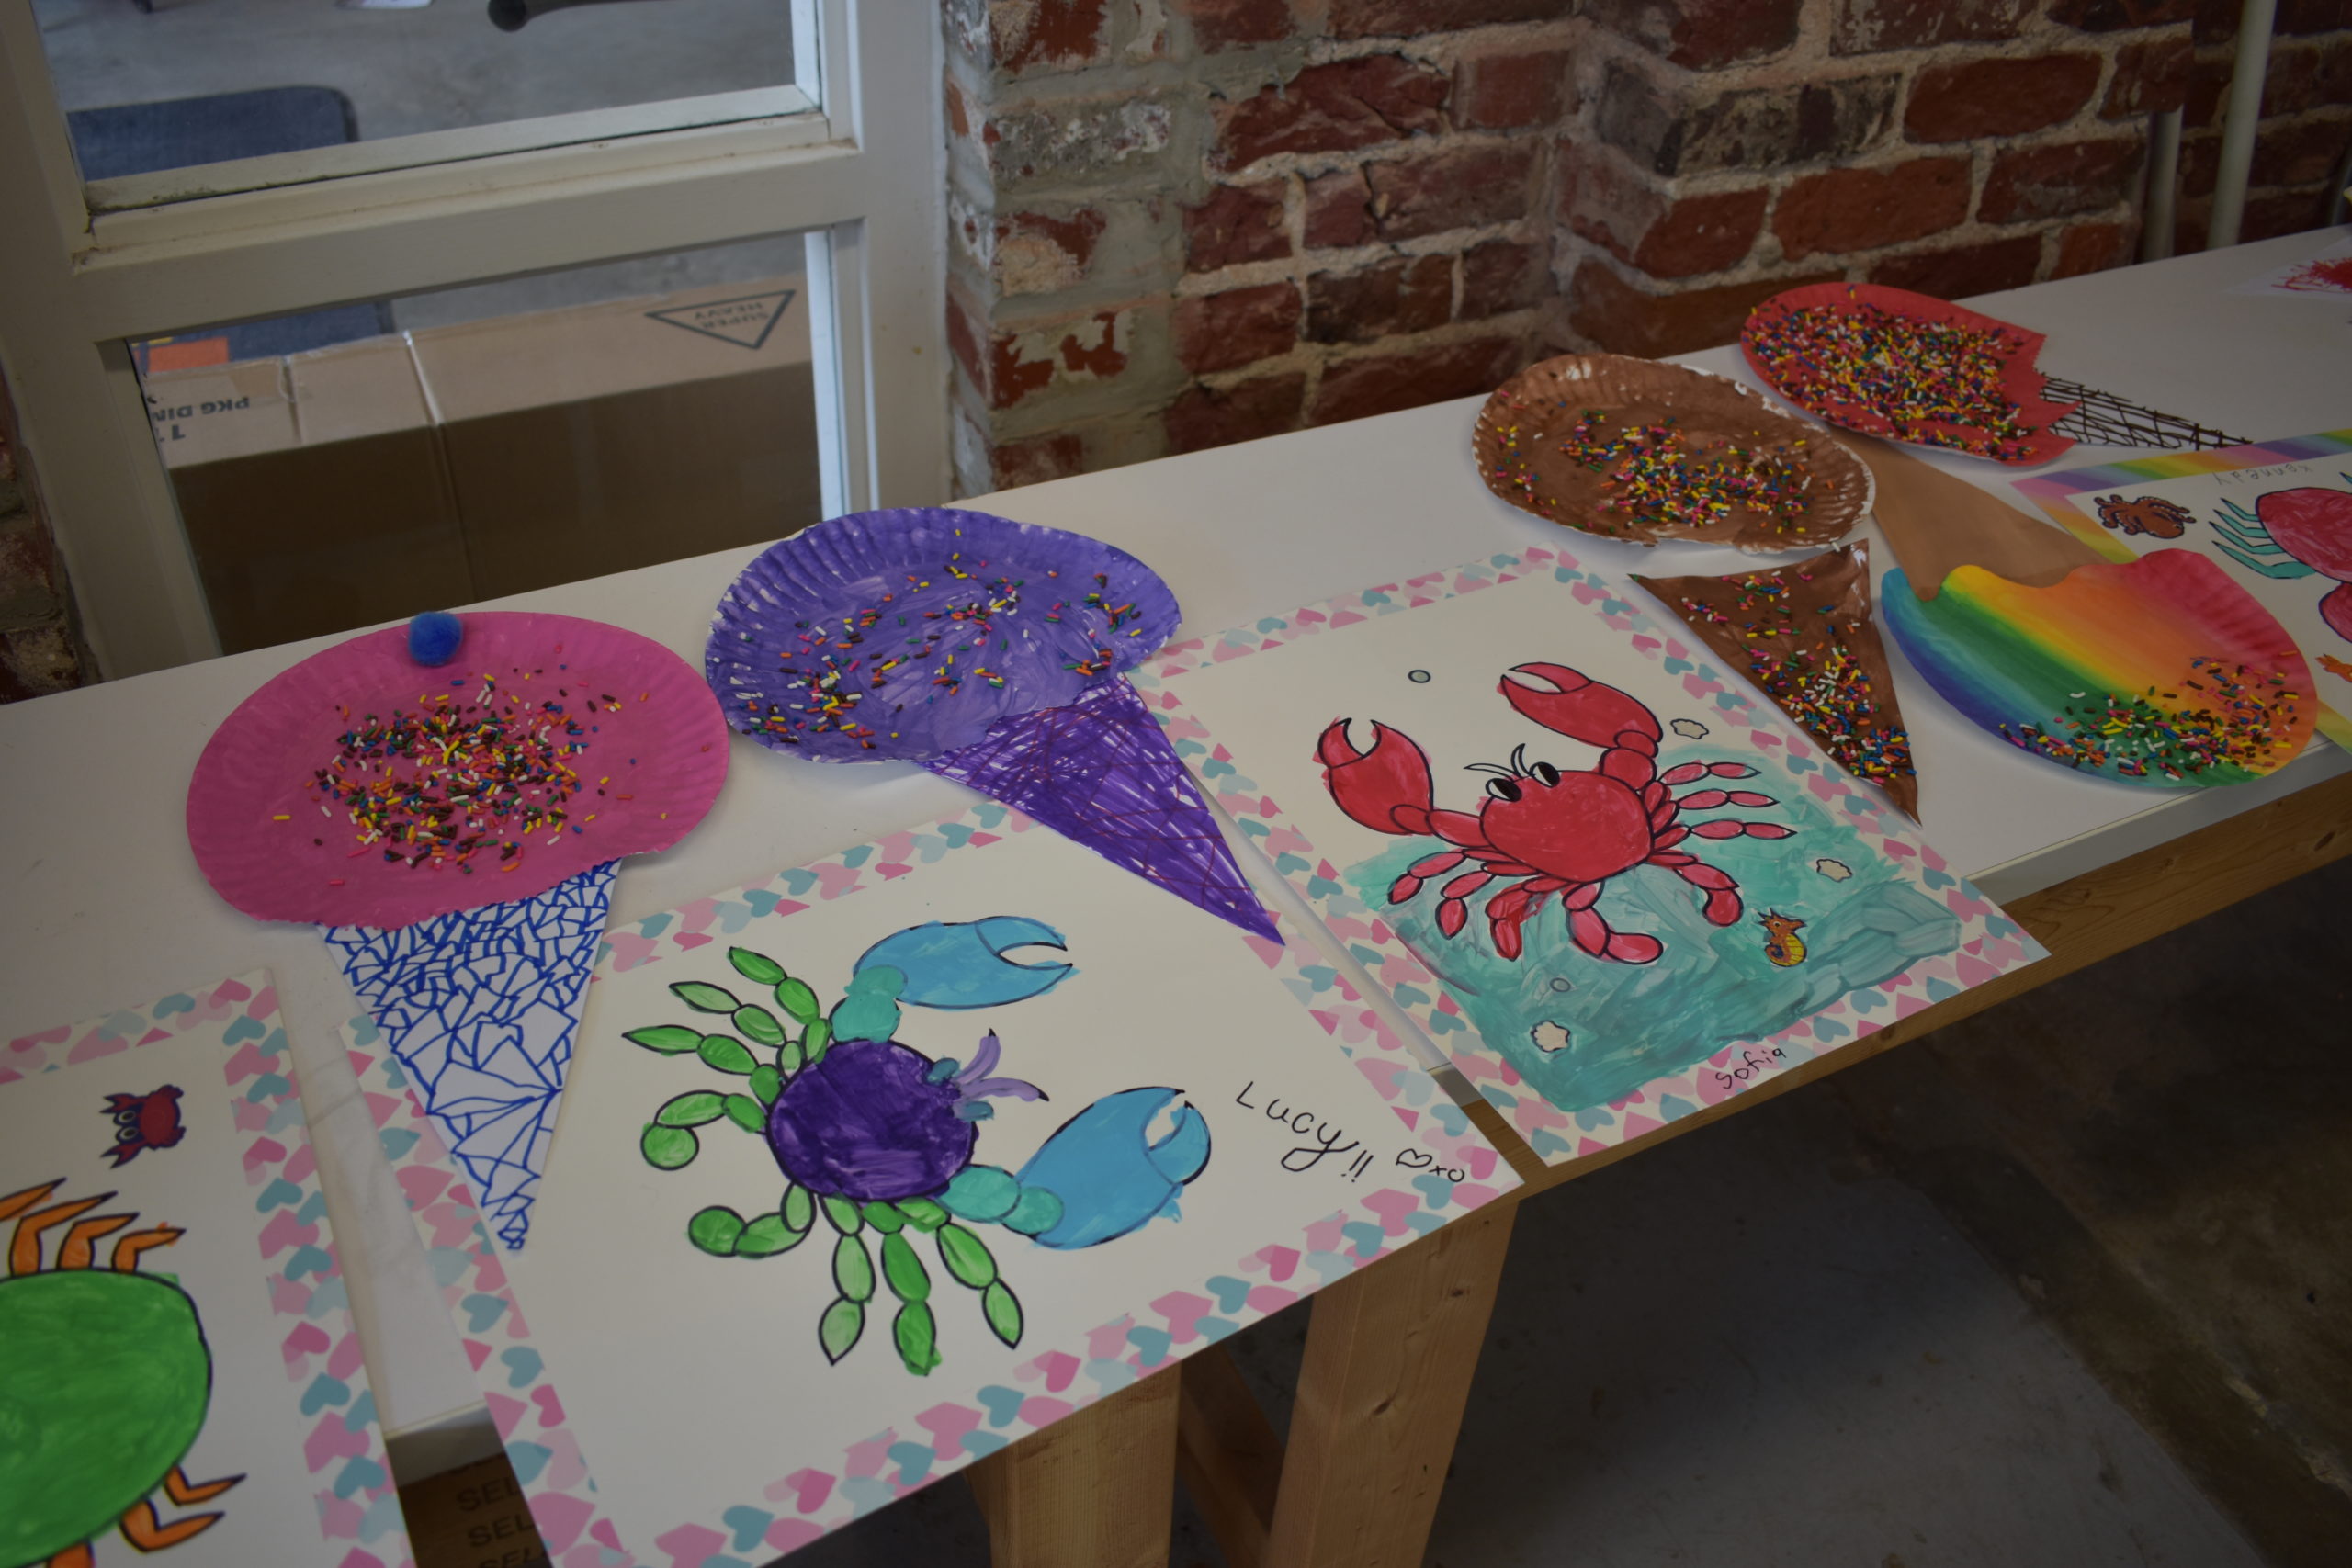 A table with pictures painted by children